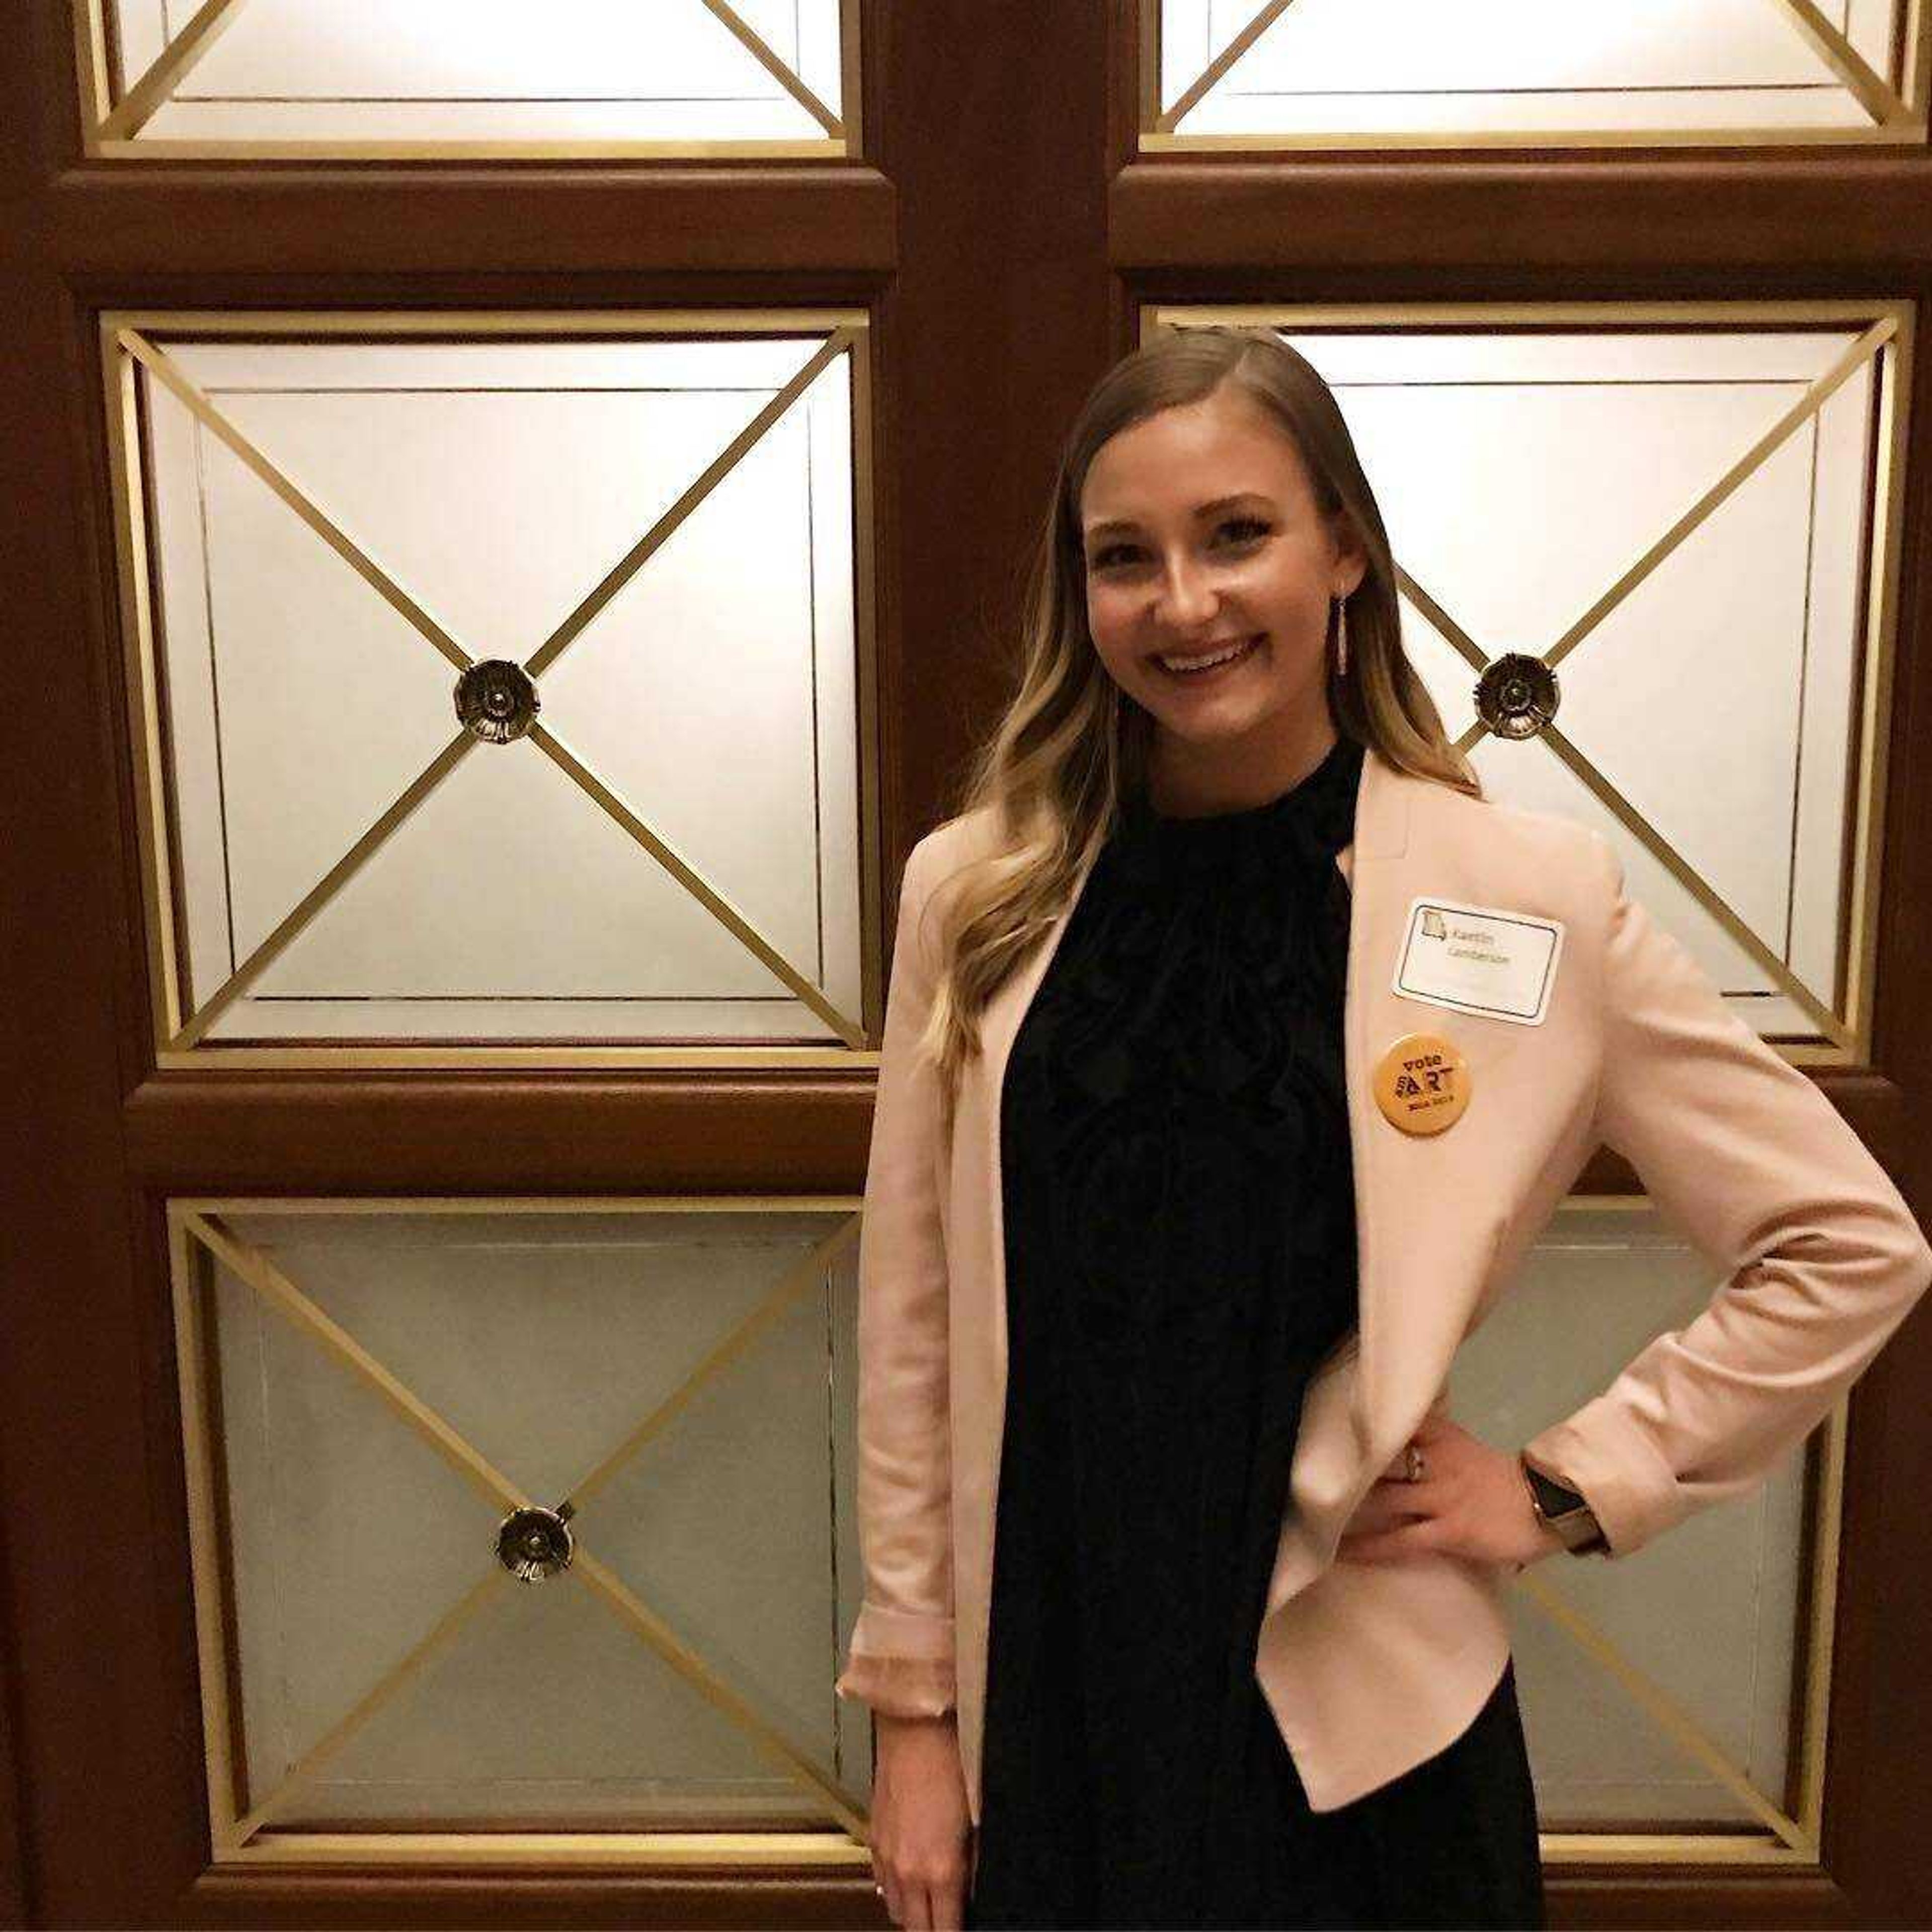 Senior Kaetlin Lamberson at this year's Citizens Day at the Missouri State Capitol in Jefferson City hosted by Missouri Citizens for the Arts.